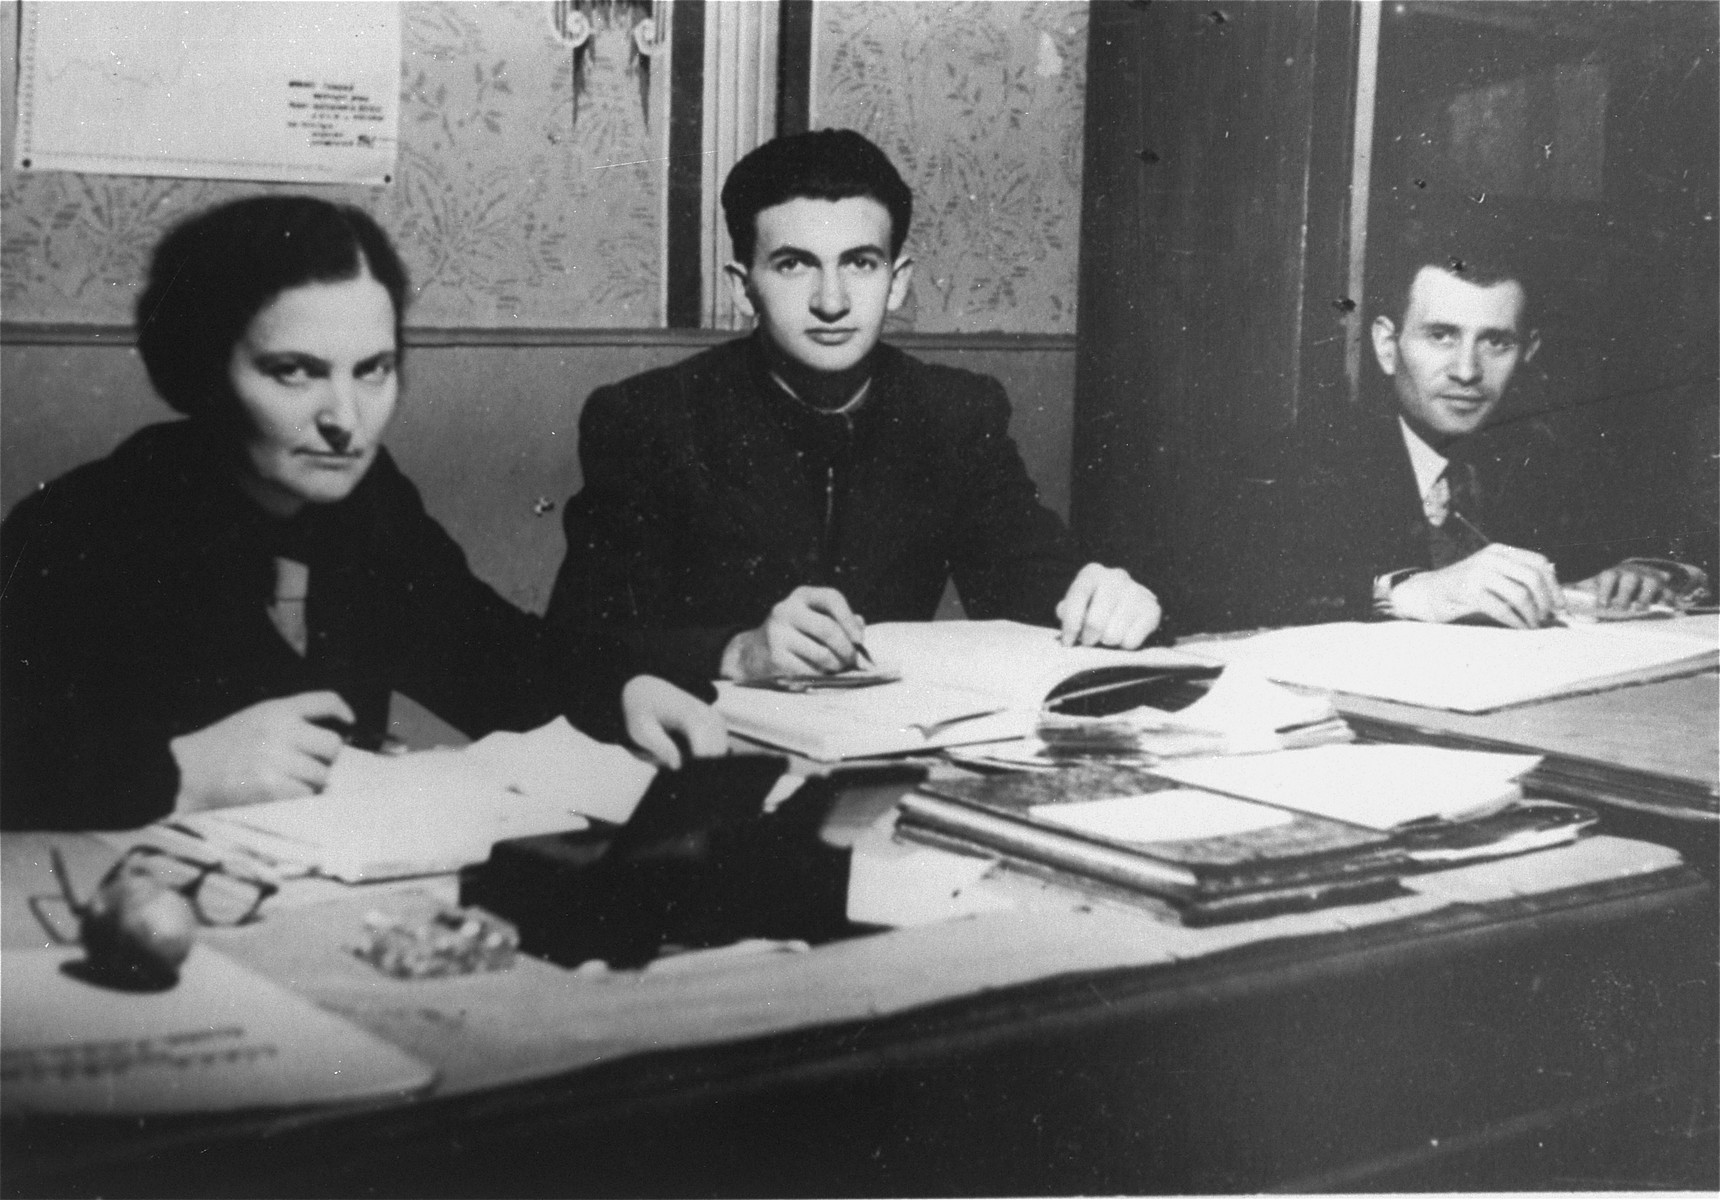 Three members of the administrative staff of the Kielce ghetto Judenrat (Jewish Council) at work in their office.

This photo was one the images included in an official album prepared by the Judenrat of the Kielce ghetto in 1942.